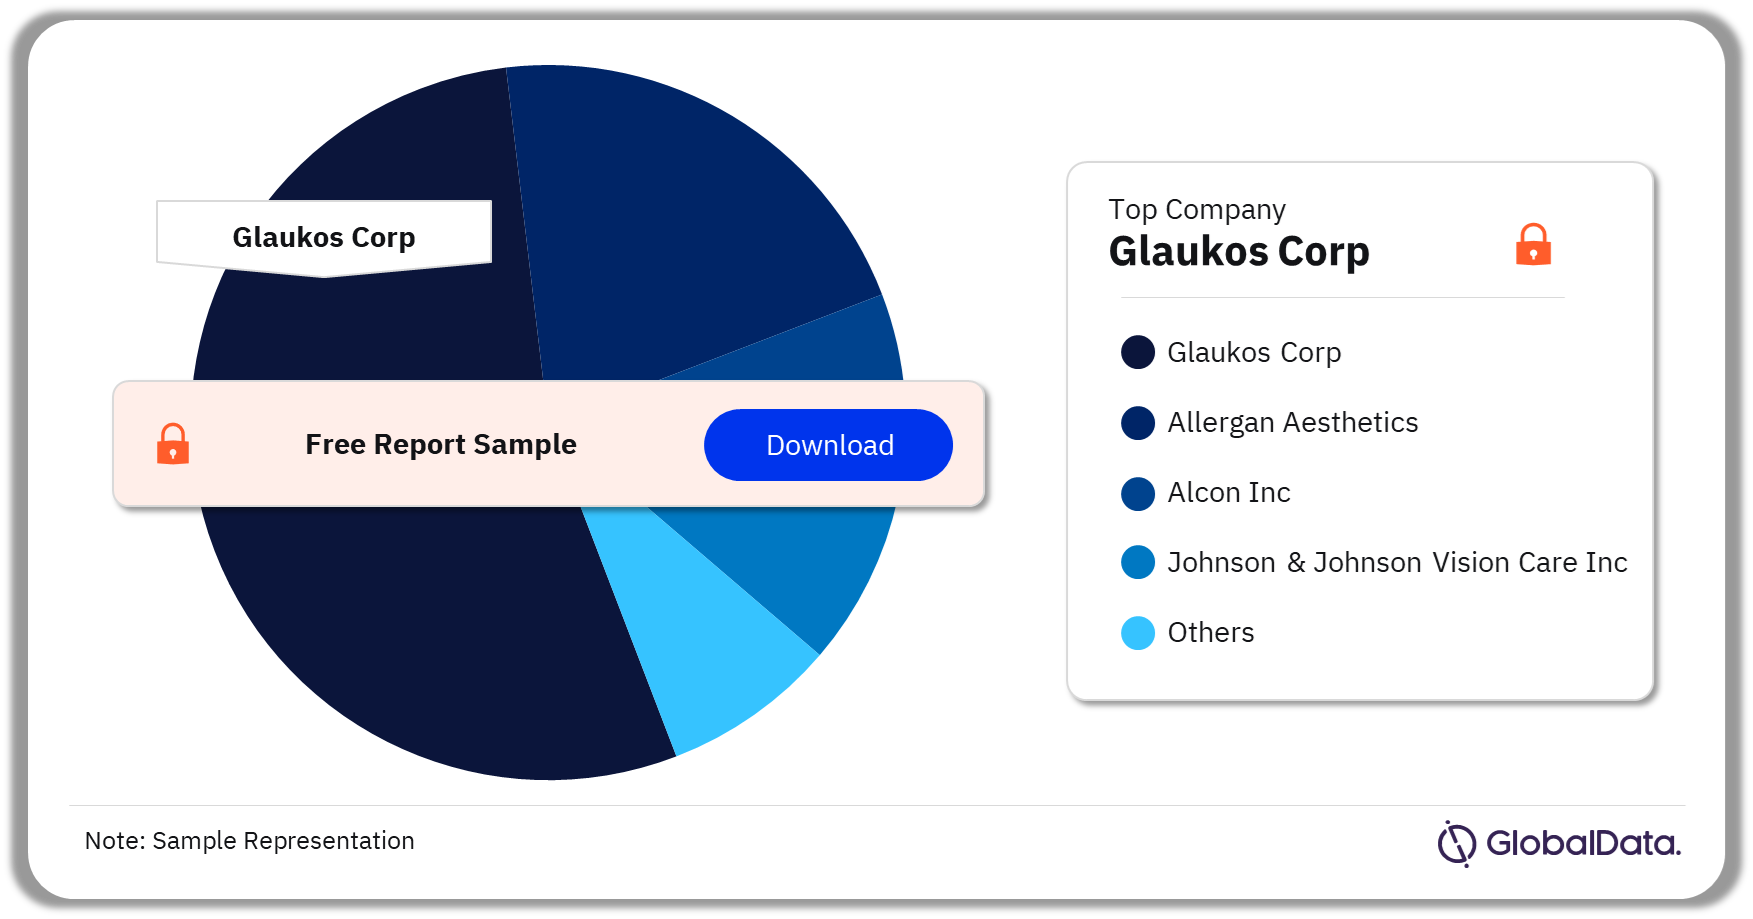 Glaucoma Surgery Devices Market Analysis by Companies, 2023 (%)